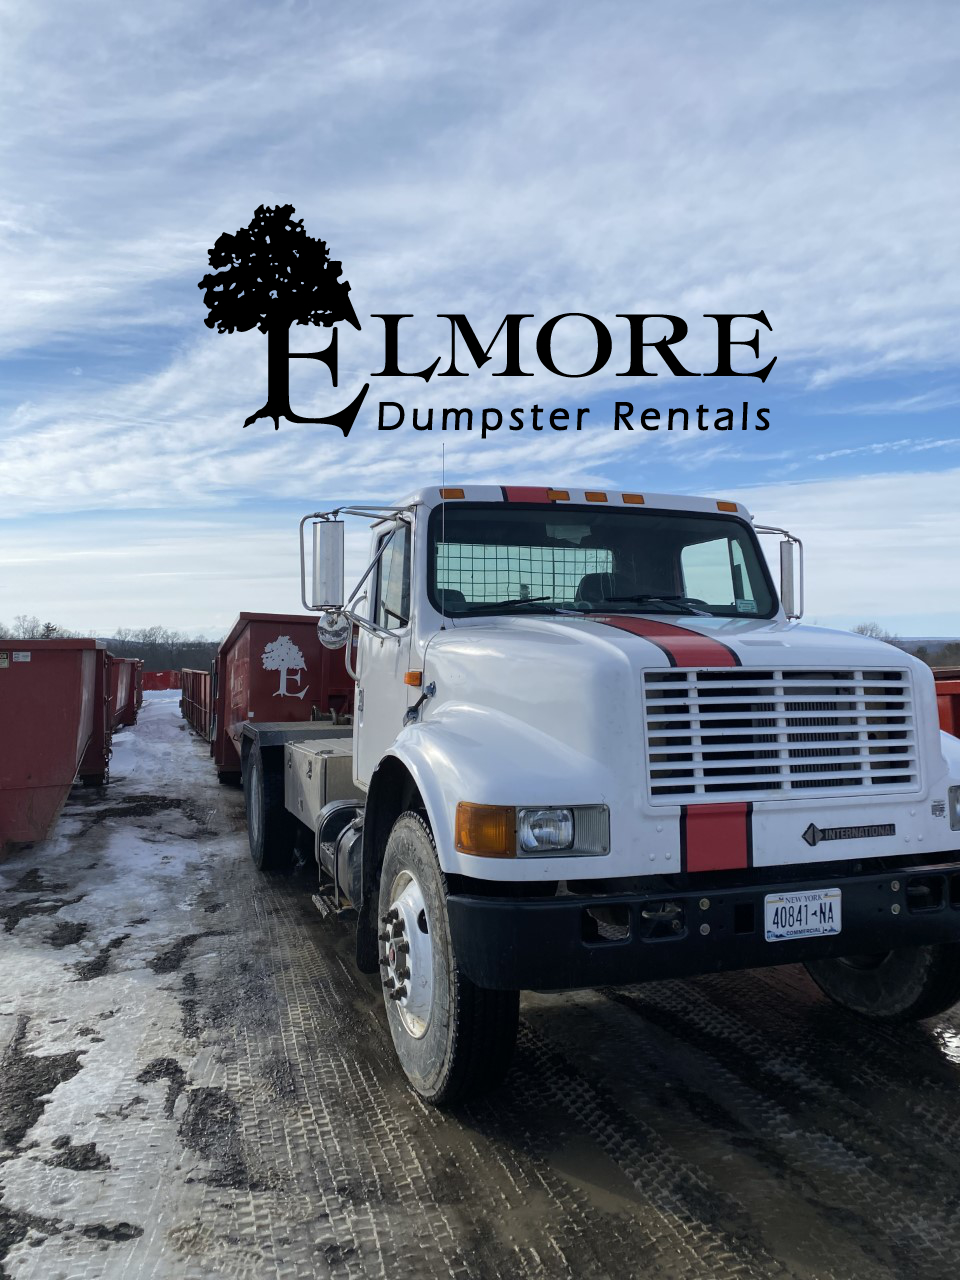 Construction Dumpster Rental Elmore Dumpster Rentals Jacksonville NY Contractors Use Year-Round